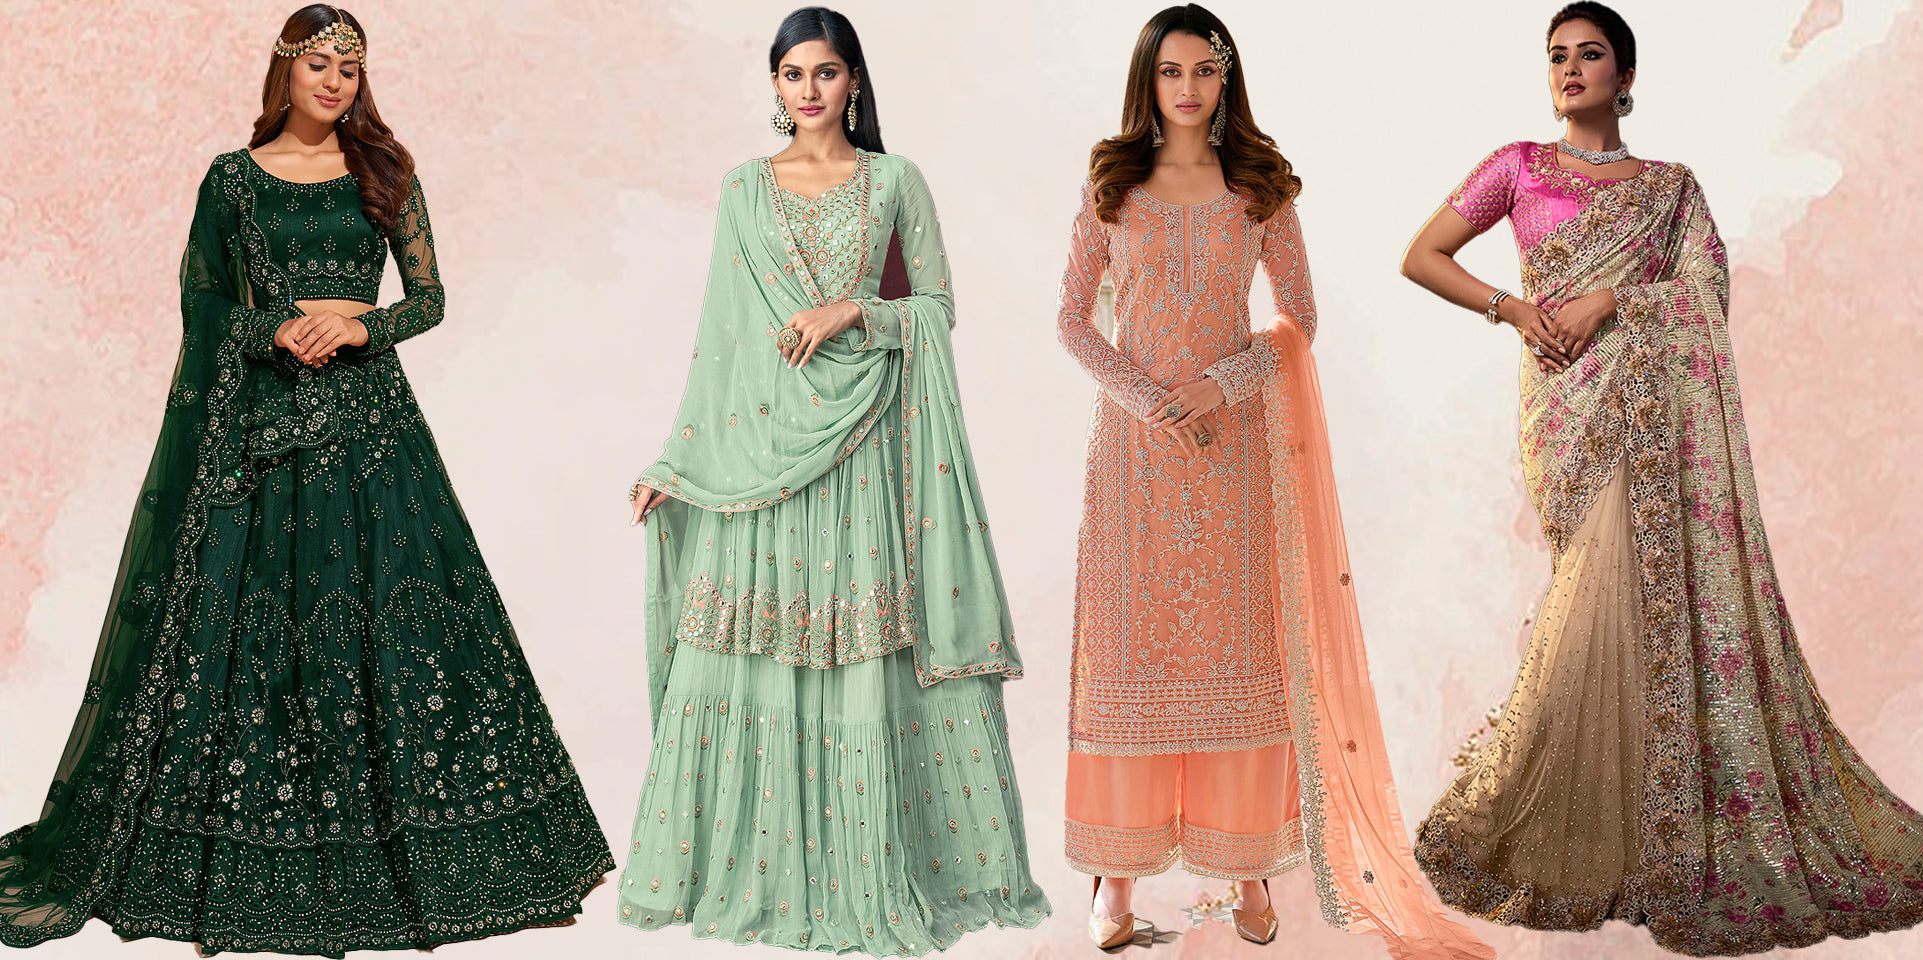 What are the Best Black Friday Deals on Indian Clothes in 2022 in USA?